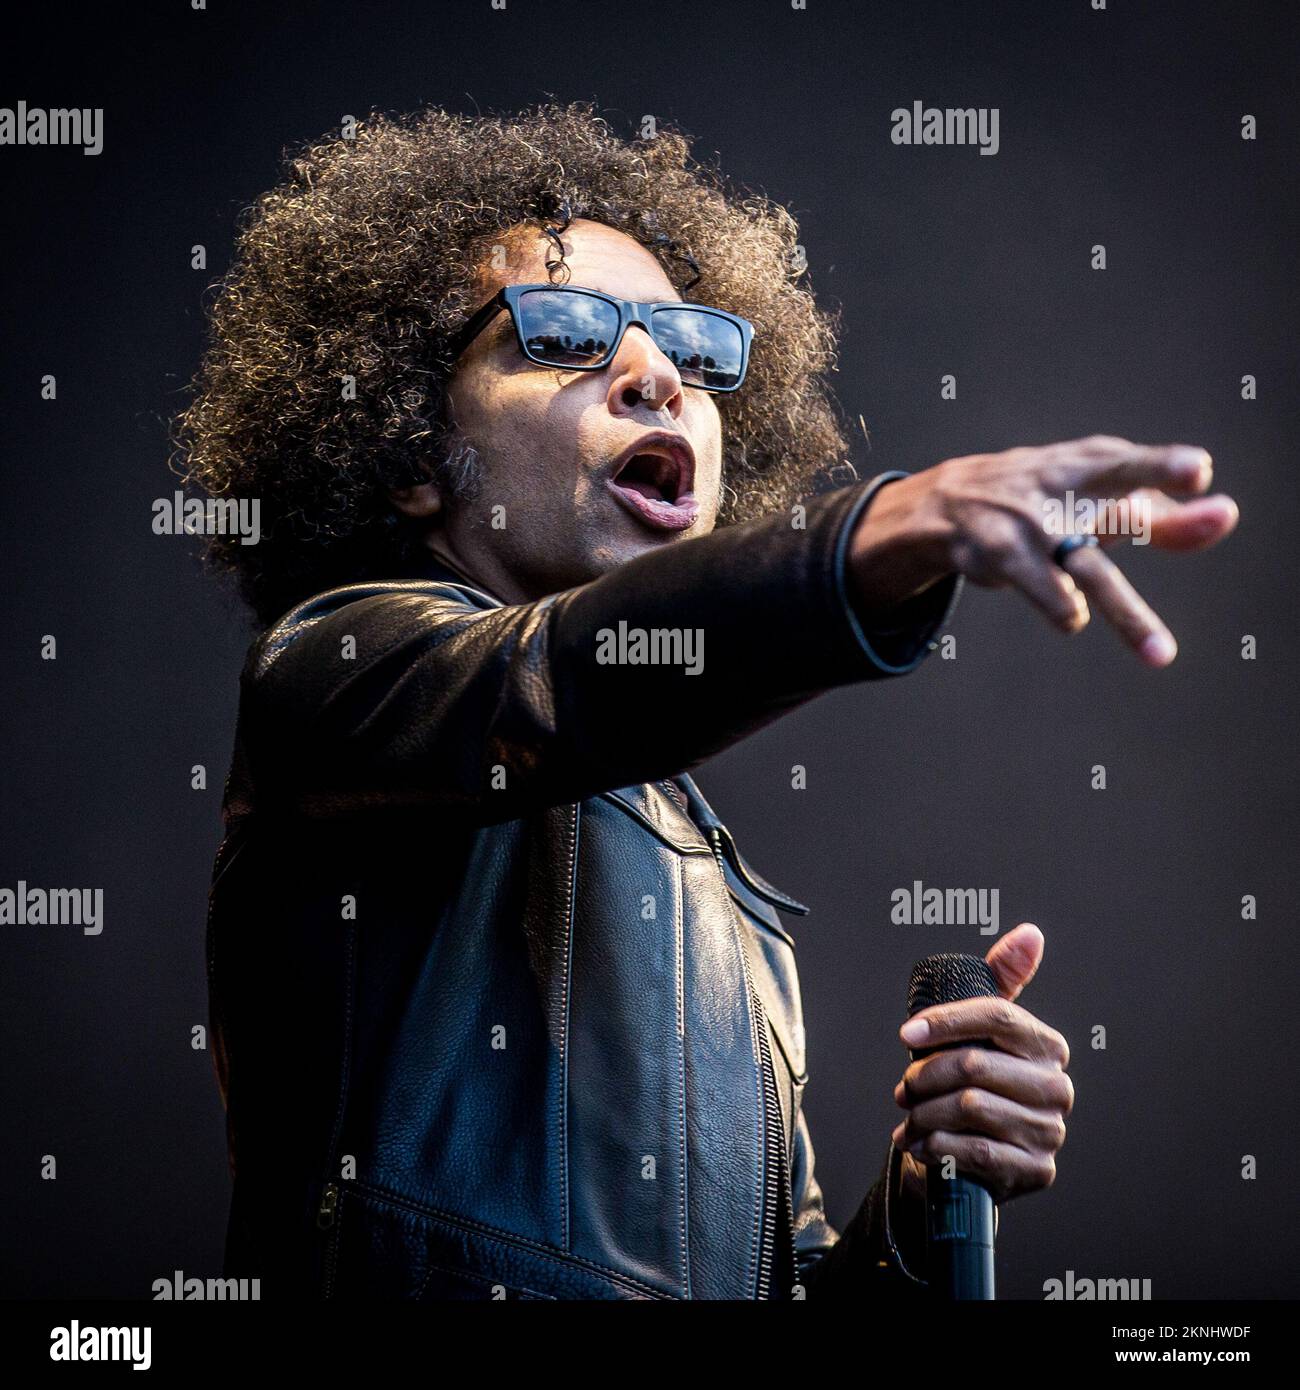 Alice in Chains singer Willian DuVall performing live on stage Stock Photo